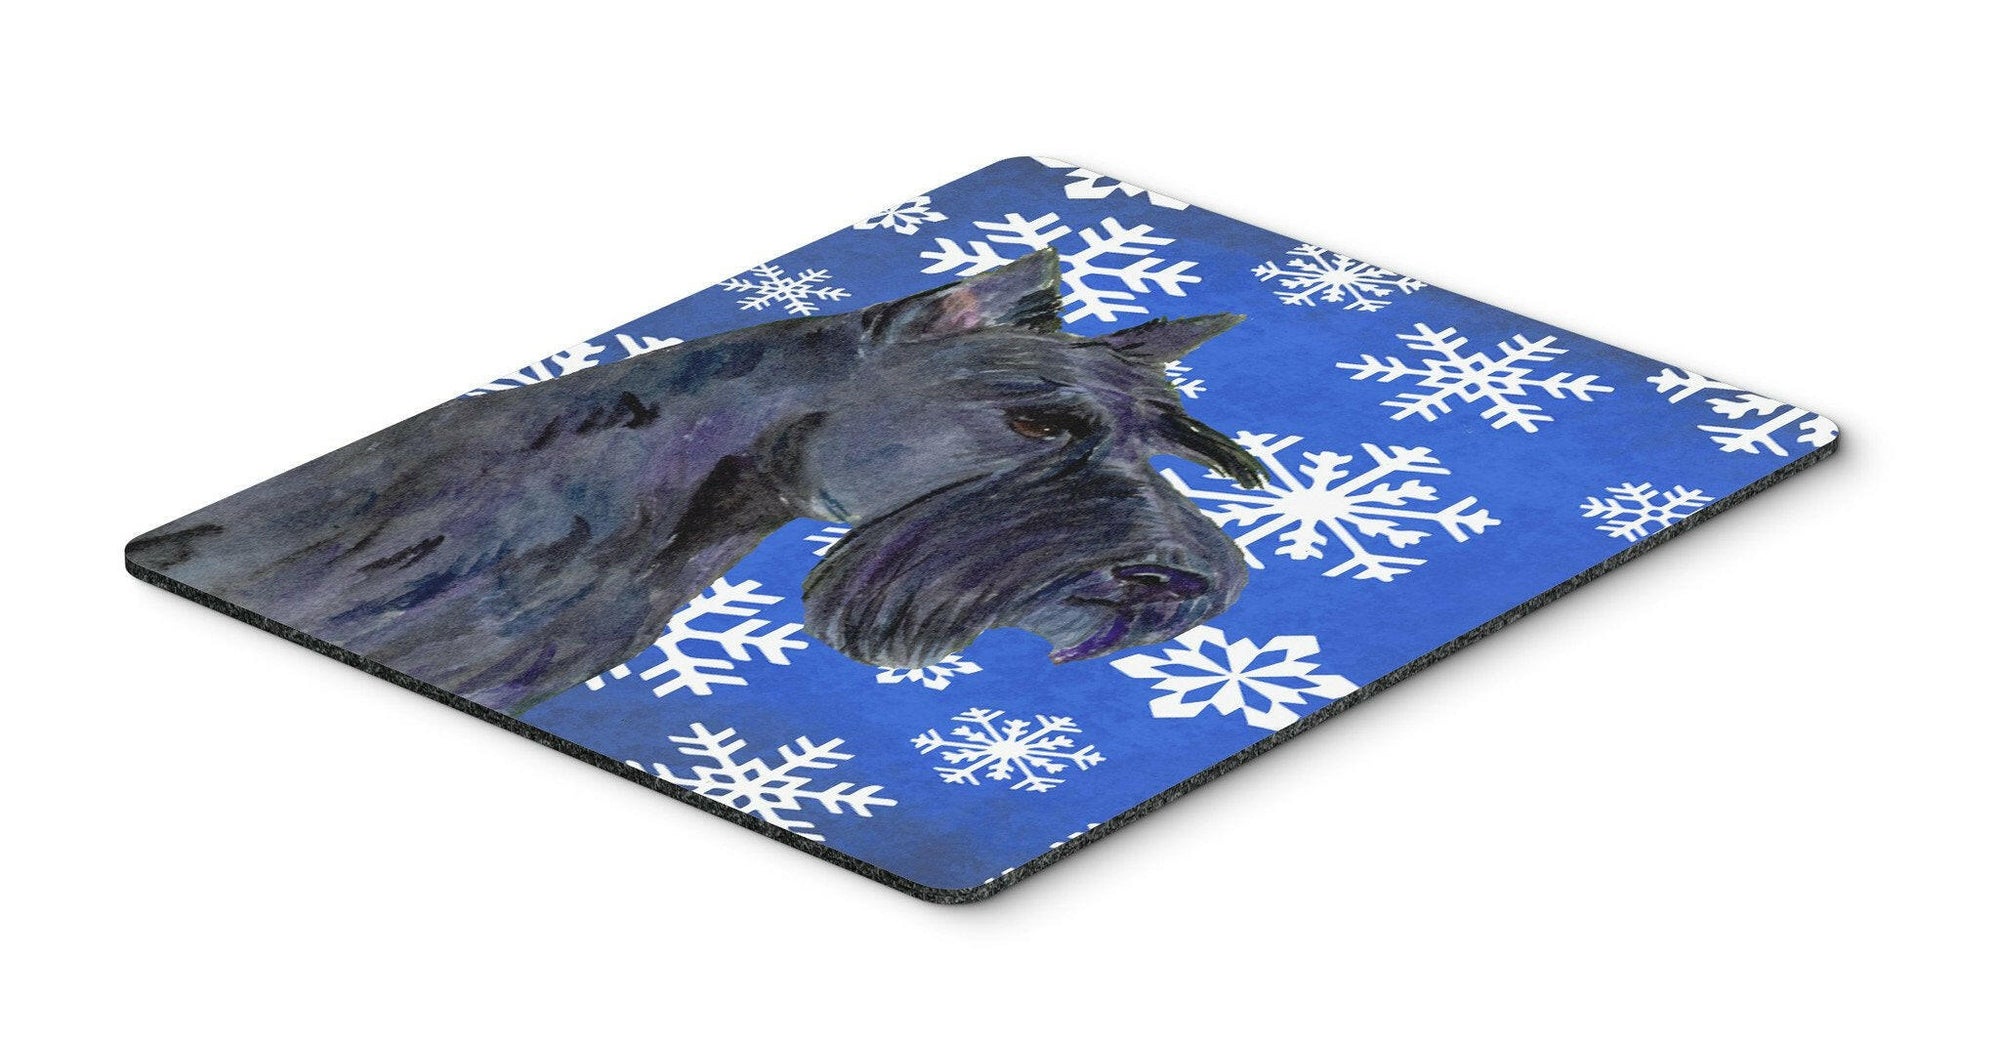 Scottish Terrier Winter Snowflakes Holiday Mouse Pad, Hot Pad or Trivet by Caroline's Treasures